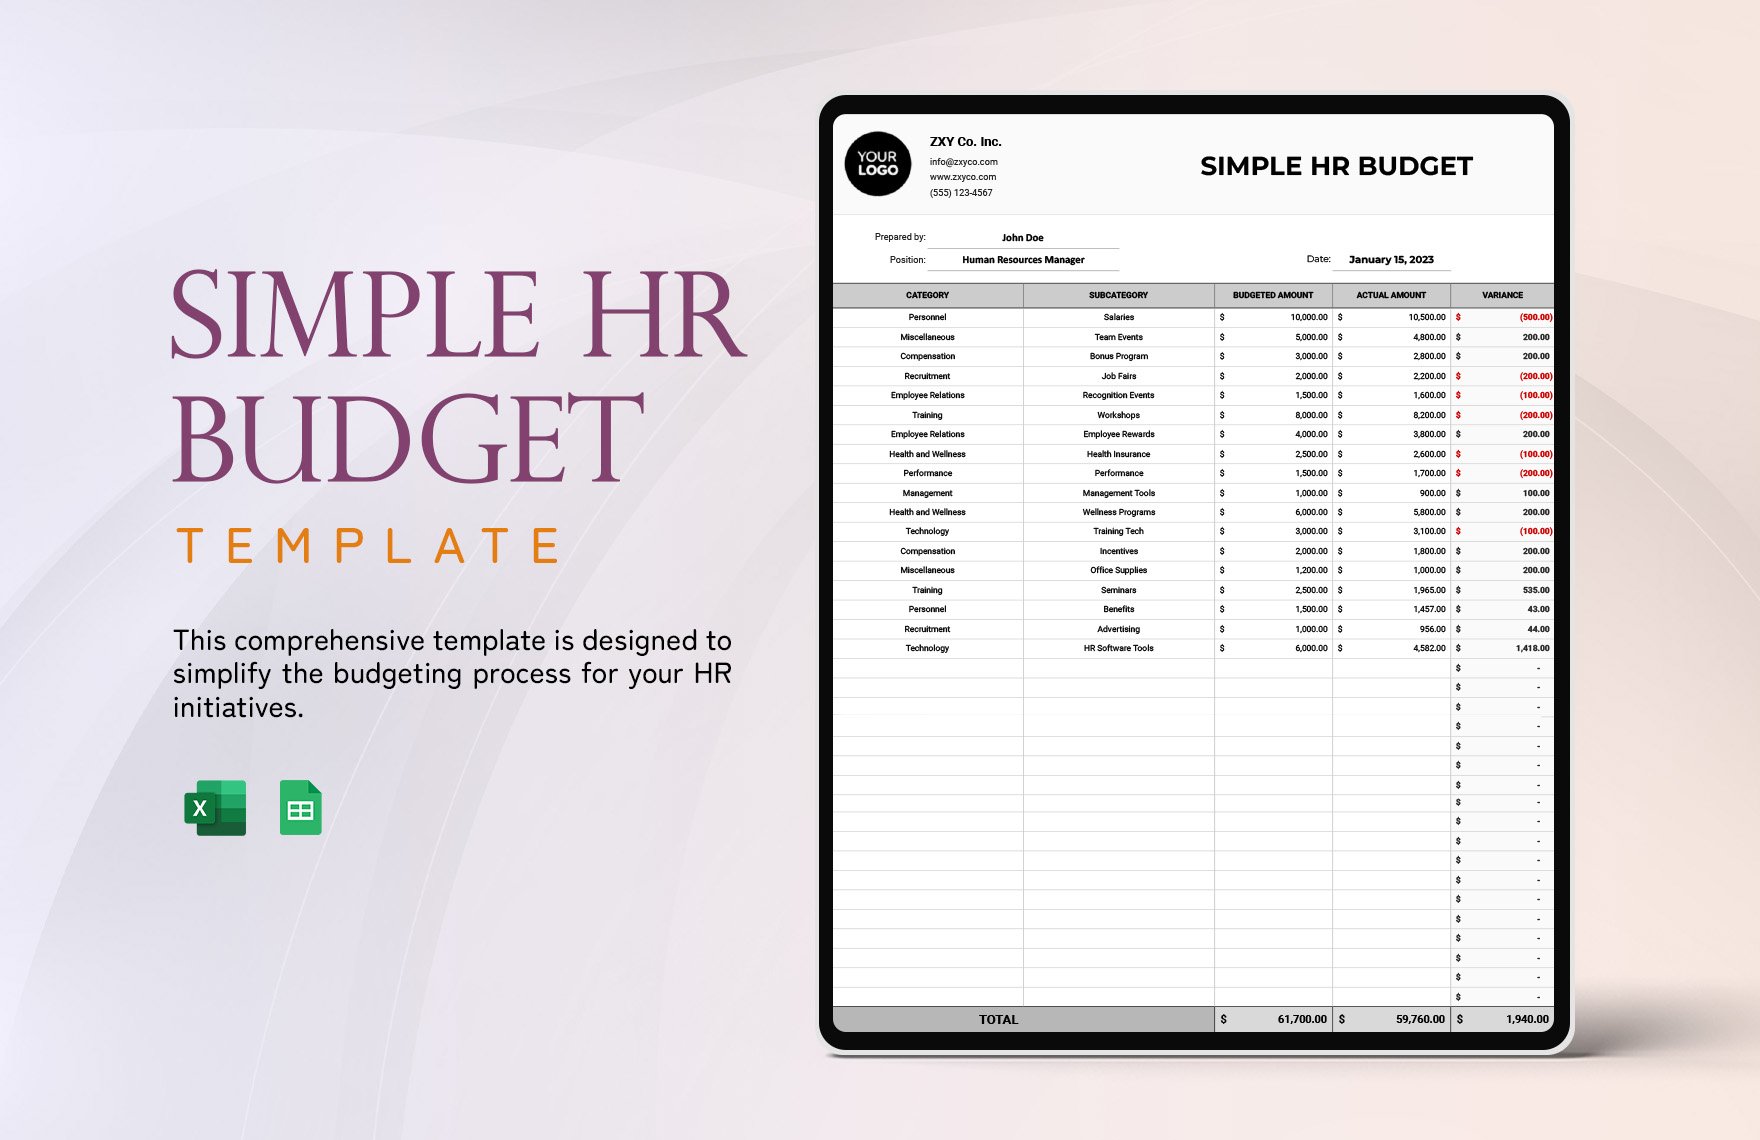 Free Simple HR Budget Template in Excel, Google Sheets